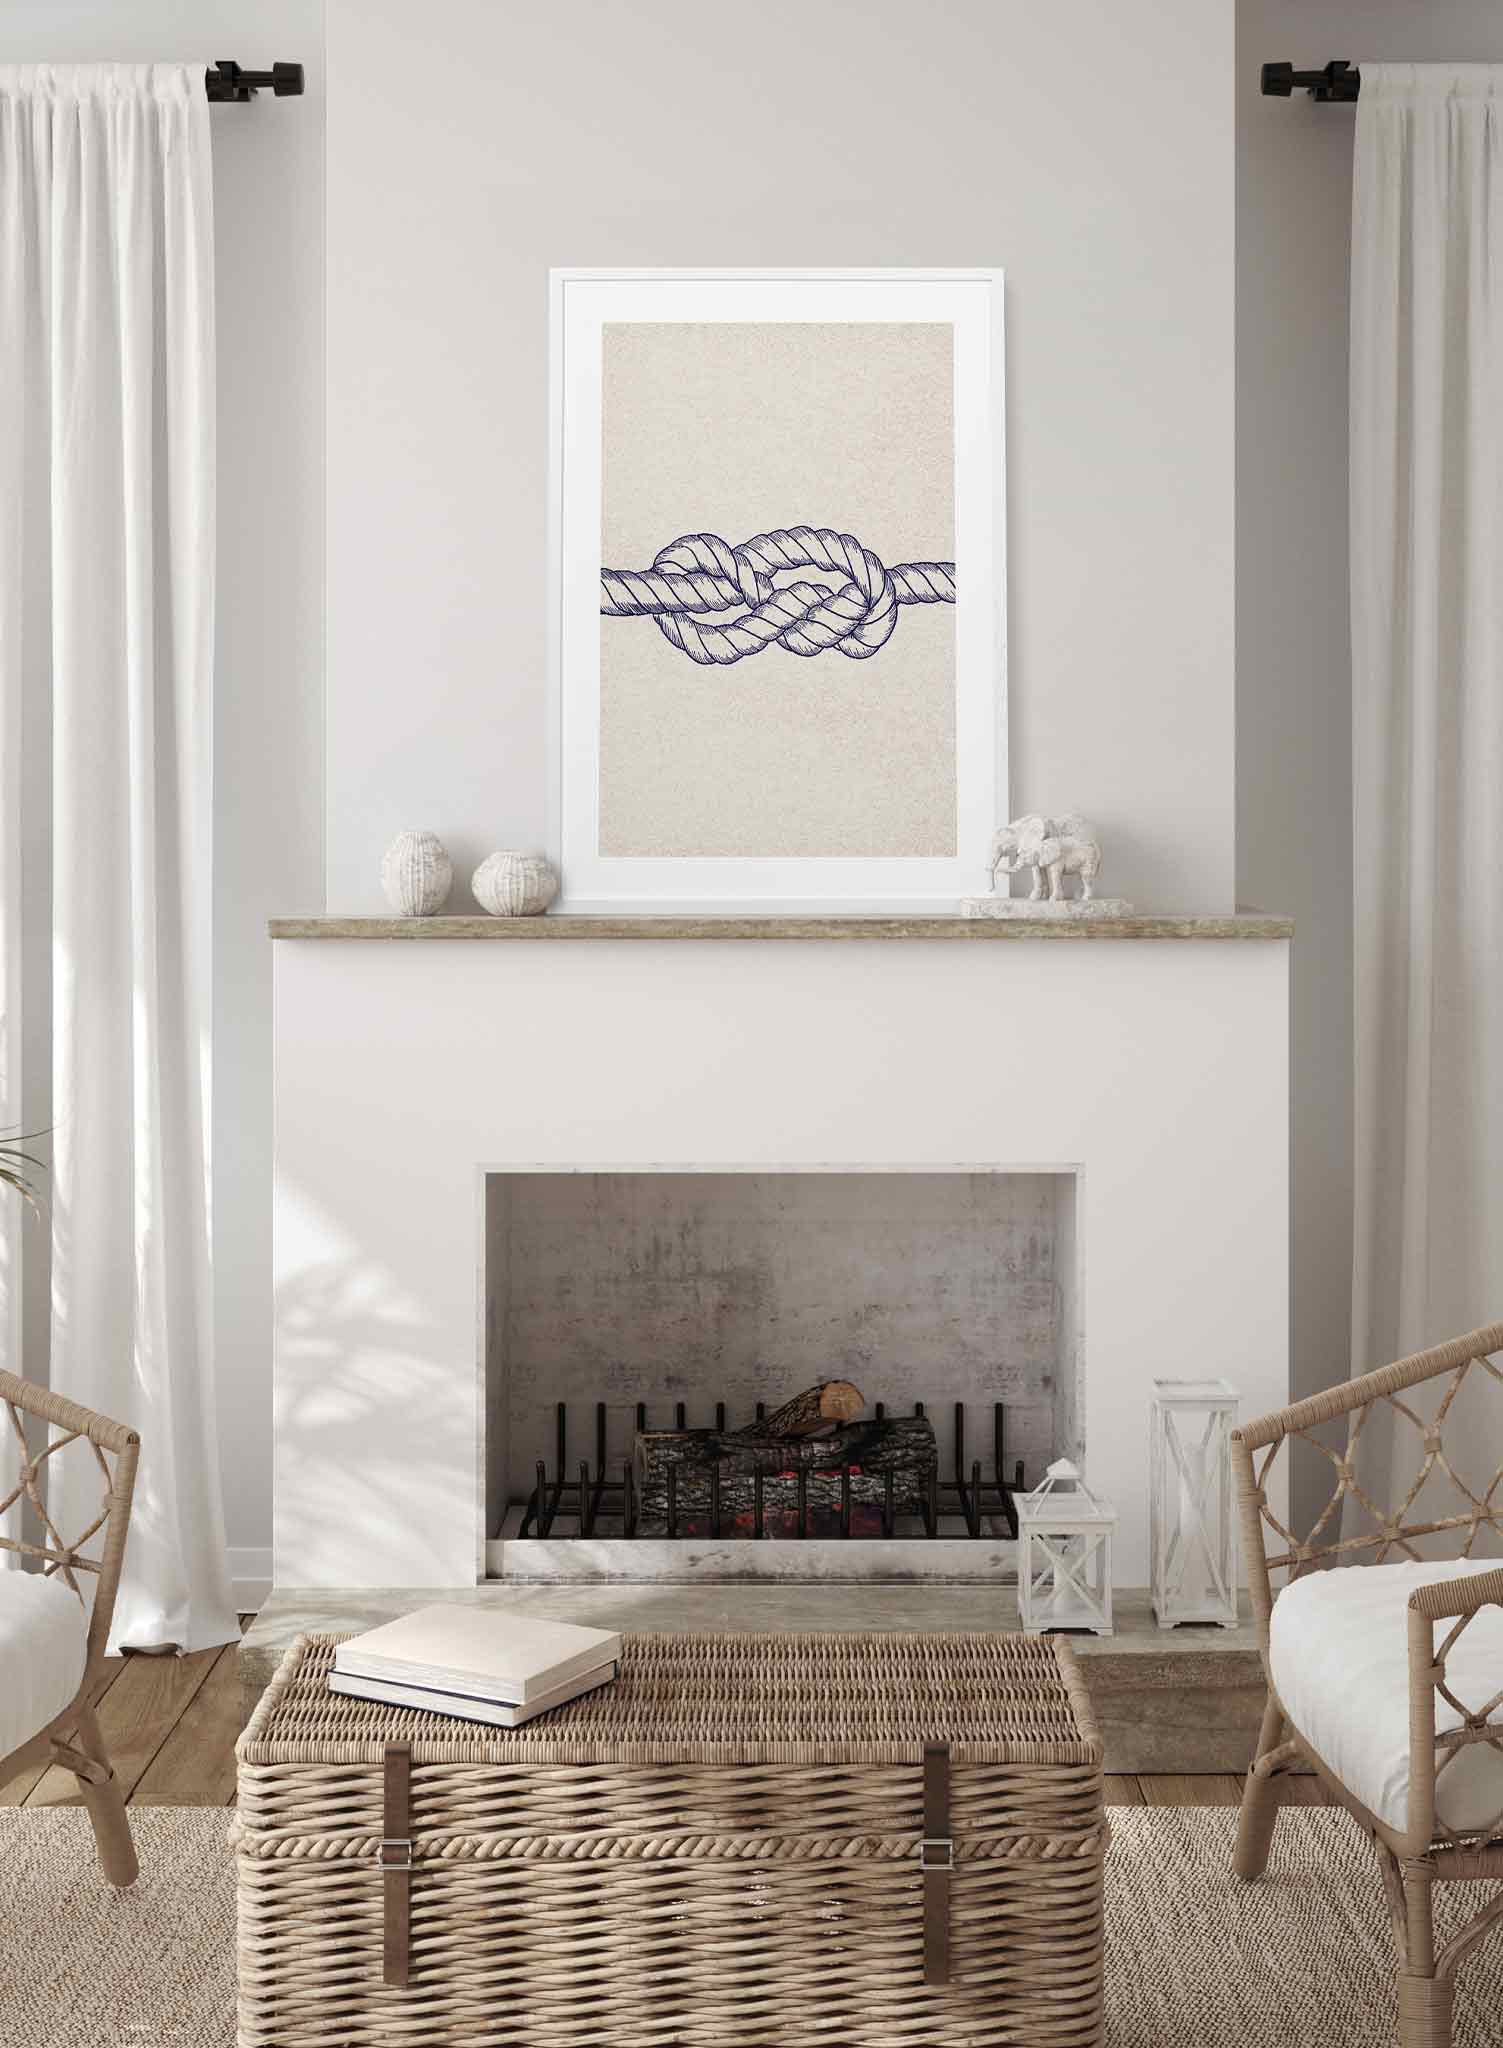 Knotty is a minimalist illustration of a beige nylon-braided roped tied in a figure eight knot by Opposite Wall.